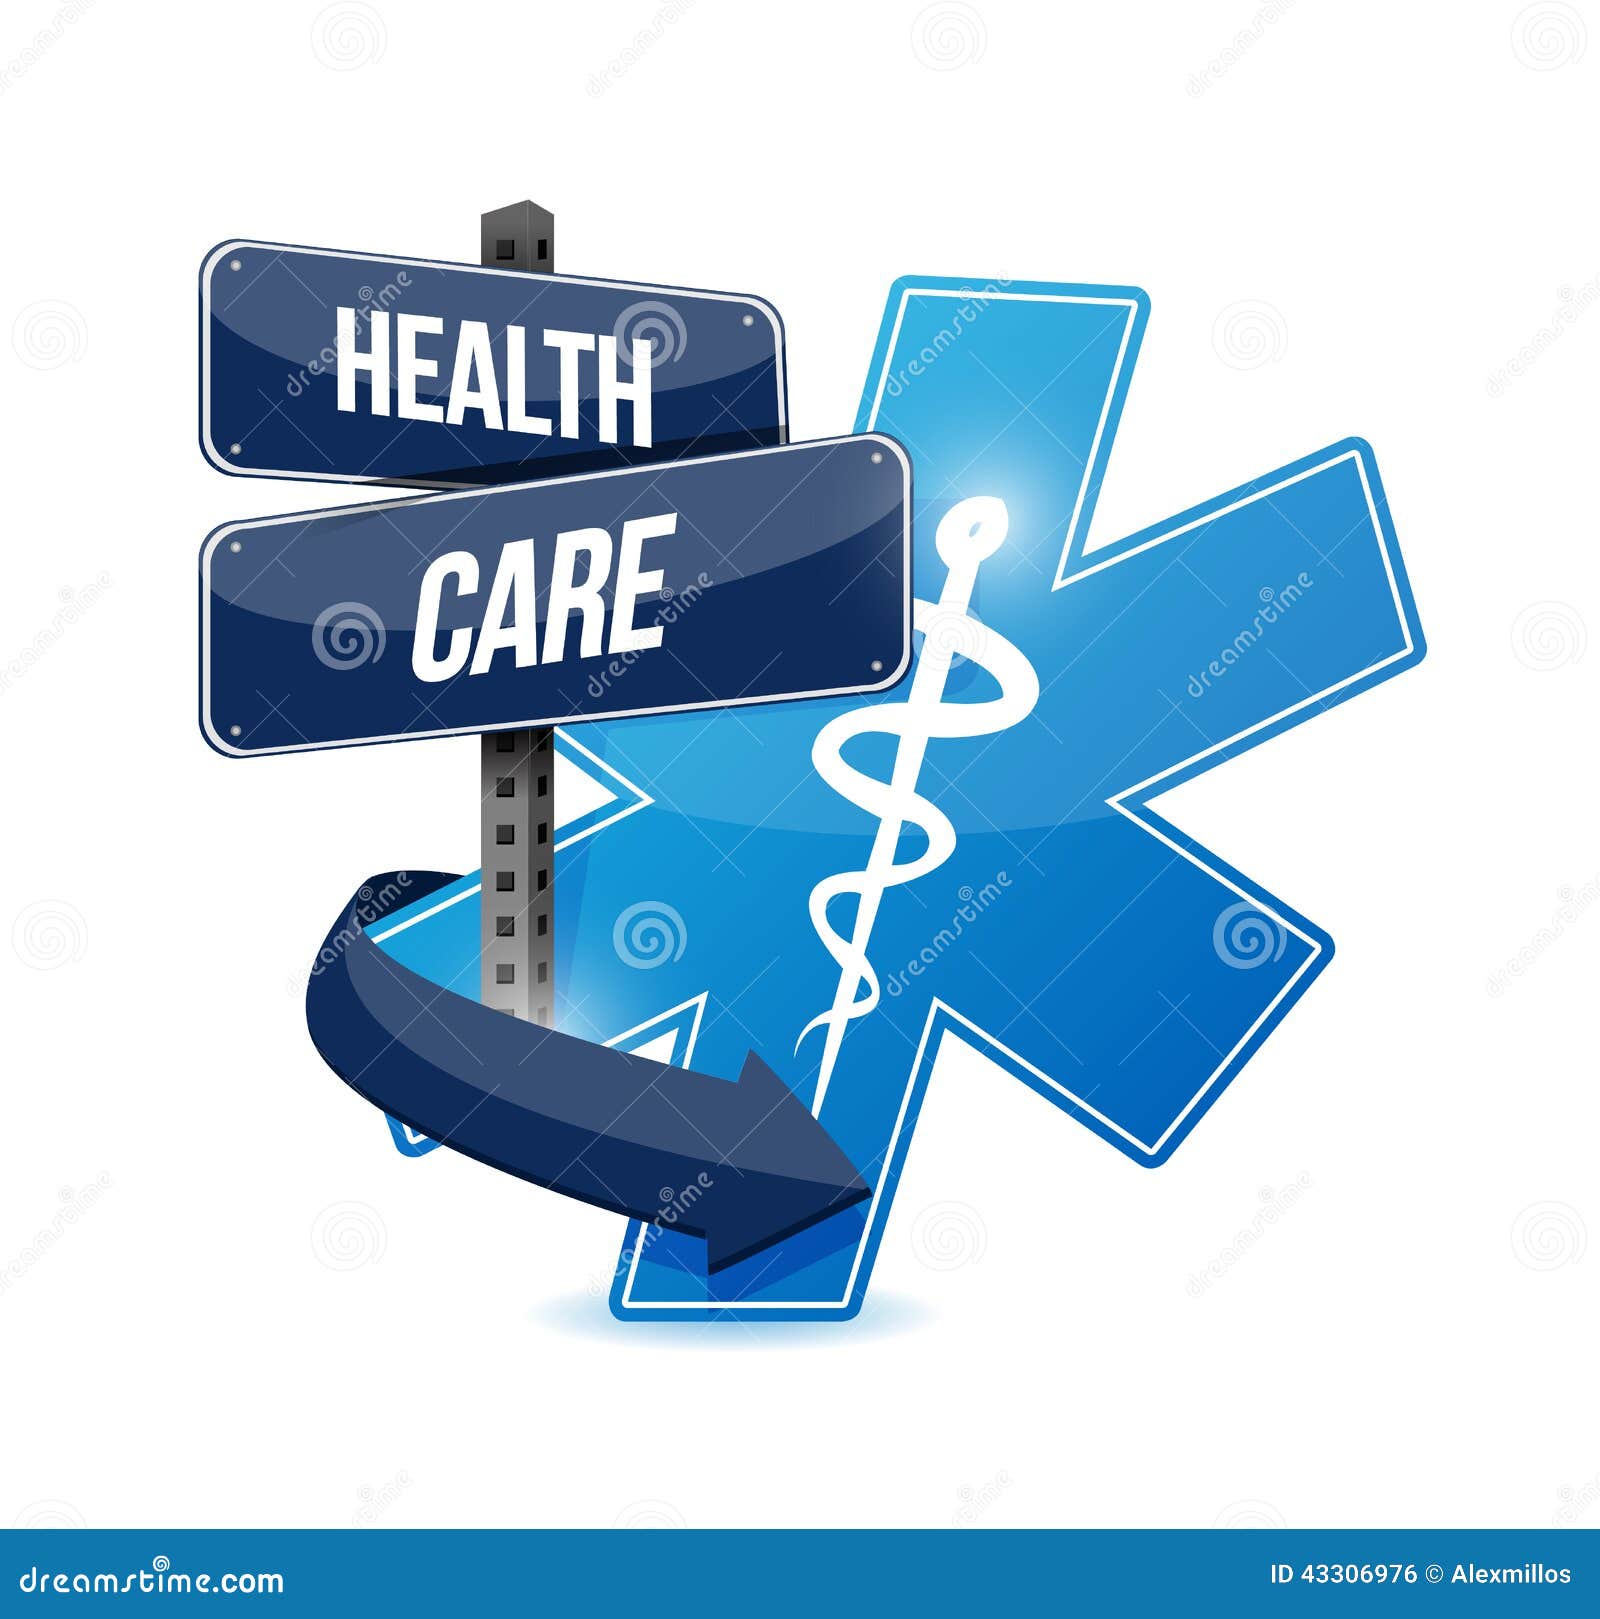 Starting a Health Care Business - What Are the Requirements? 2